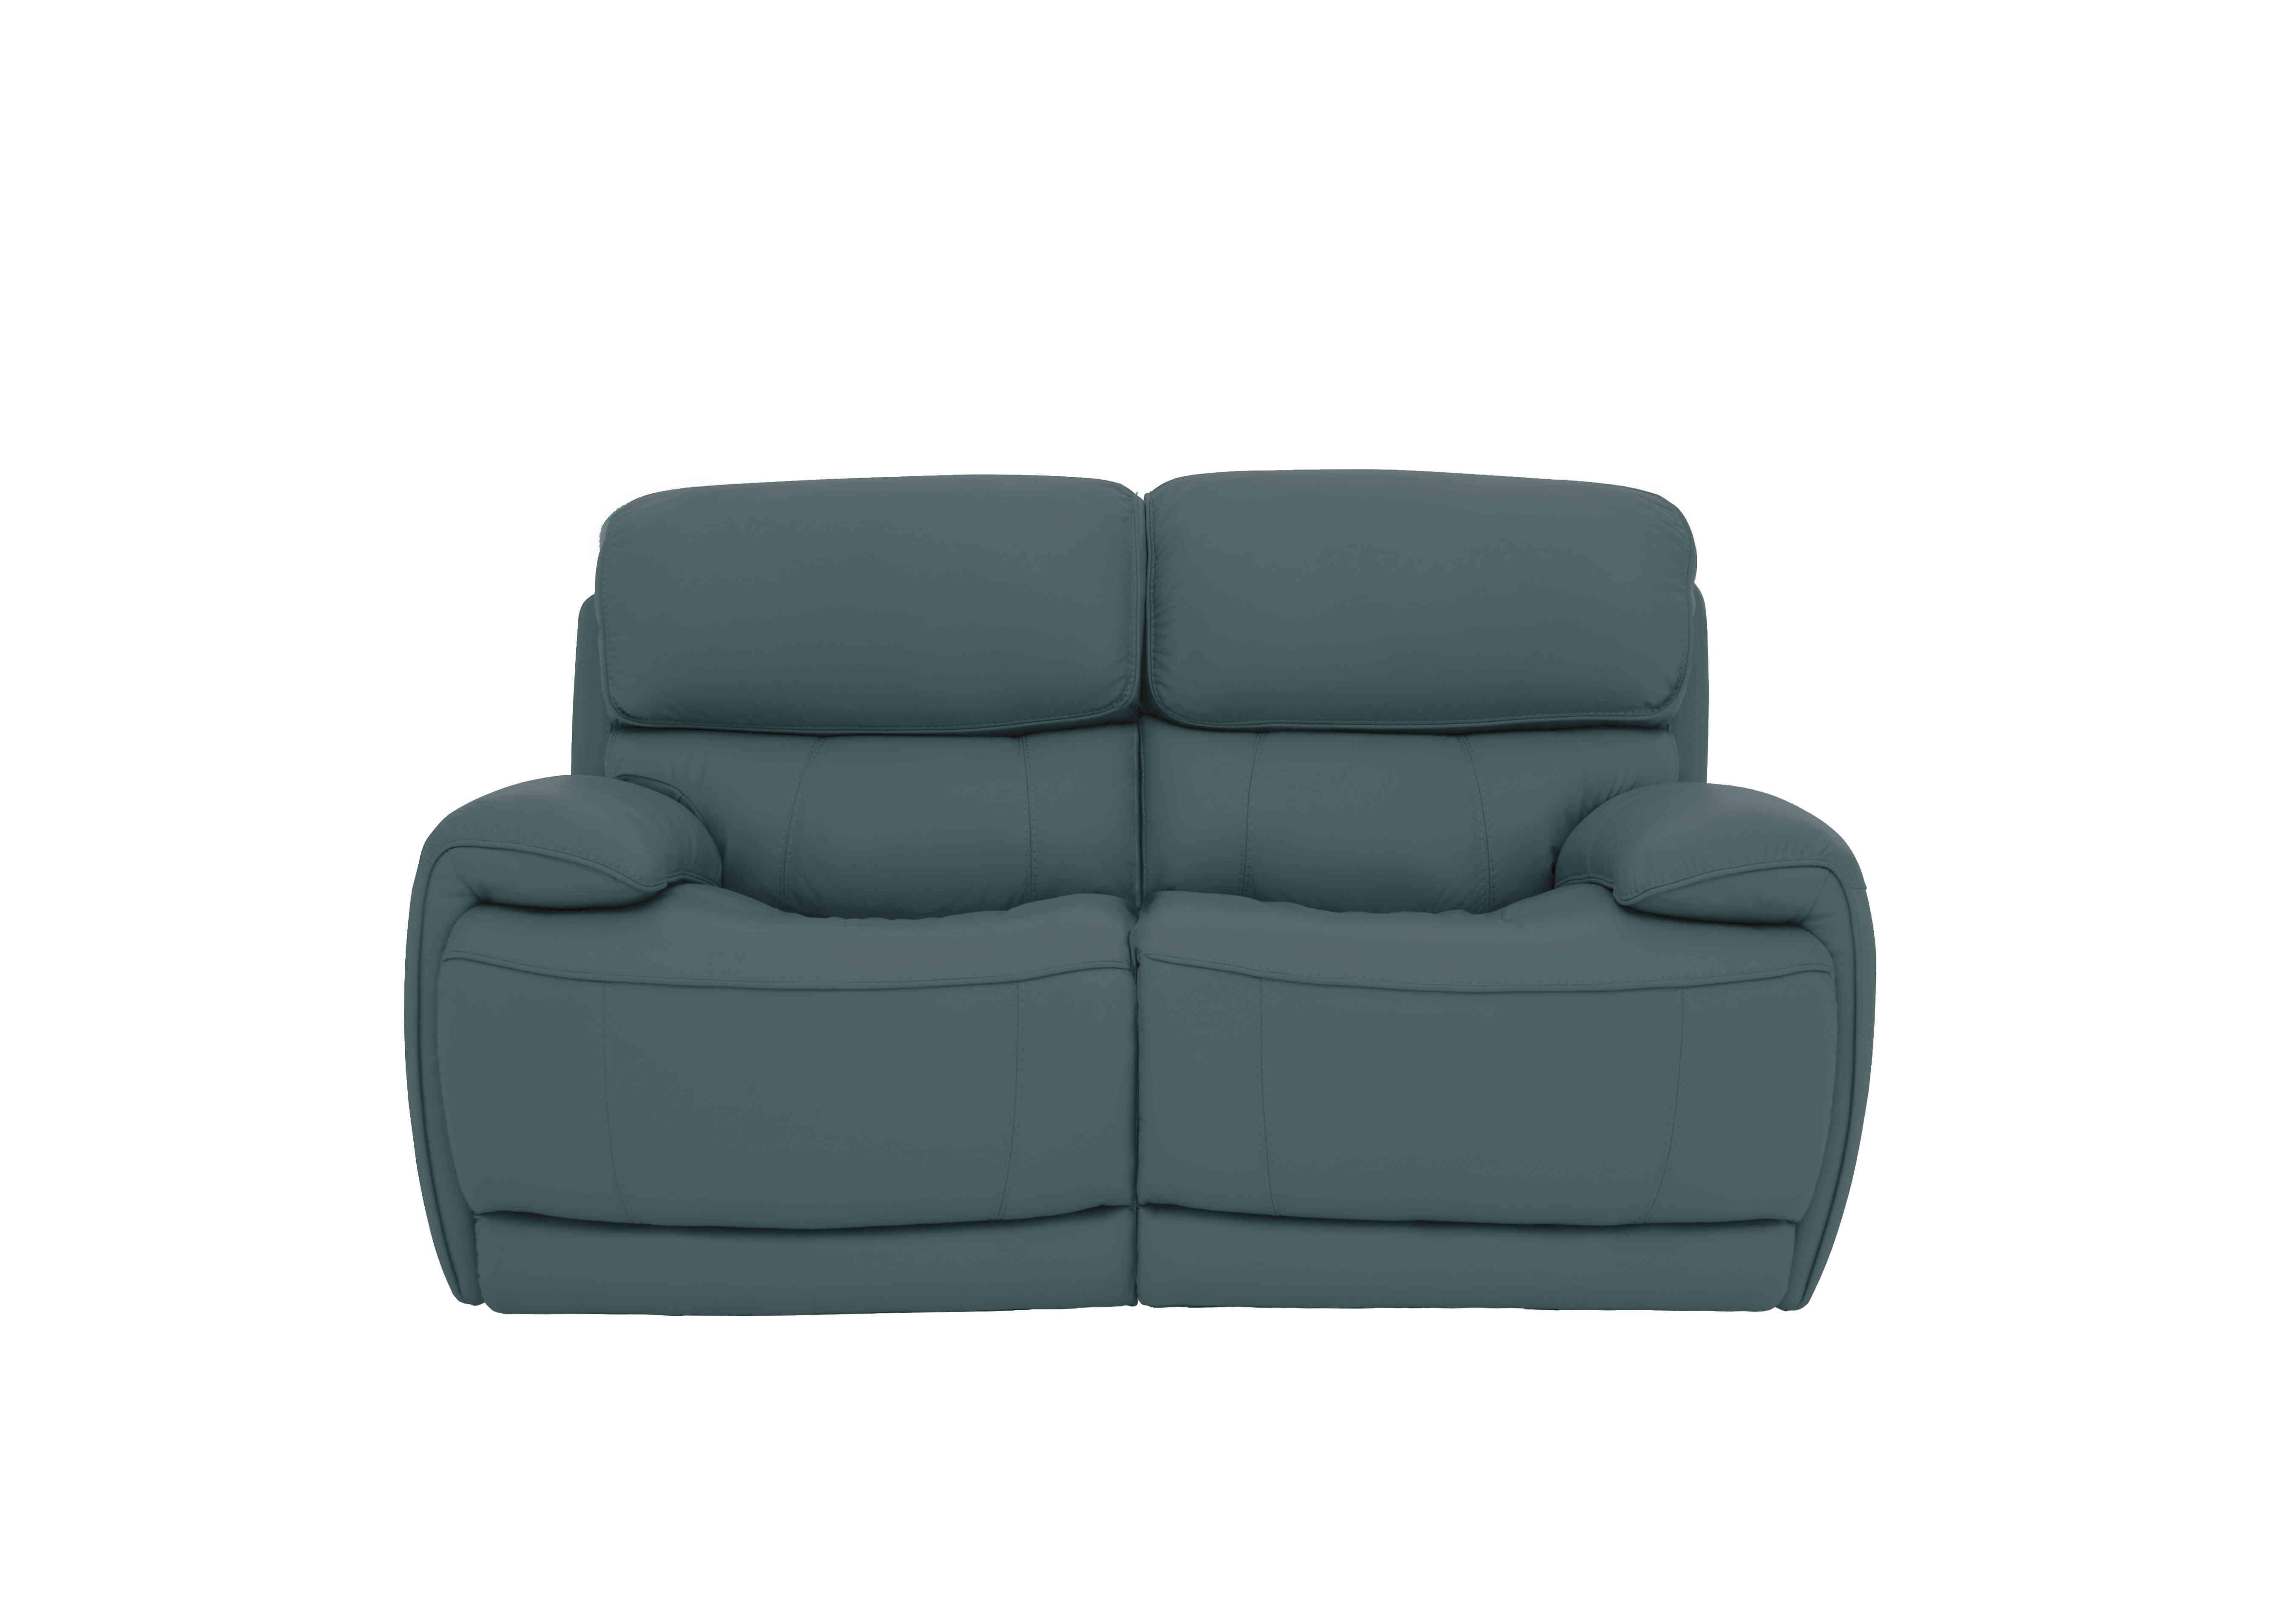 Rocco 2 Seater Leather Power Rocker Sofa with Power Headrests in Bv-301e Lake Green on Furniture Village